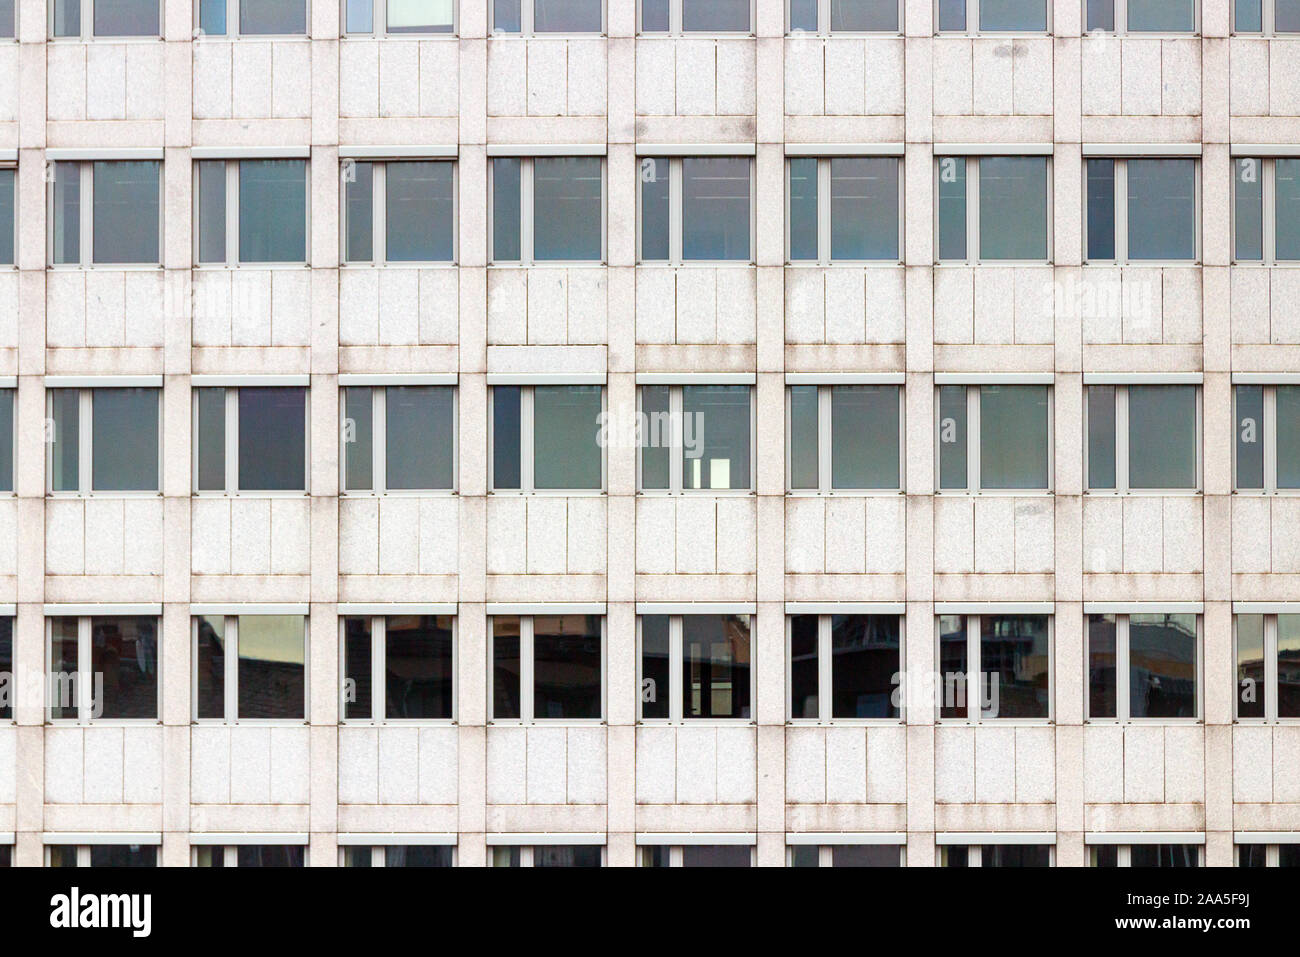 Gray facade of a multi storey office building with a symmetrical pattern of windows. Stock Photo